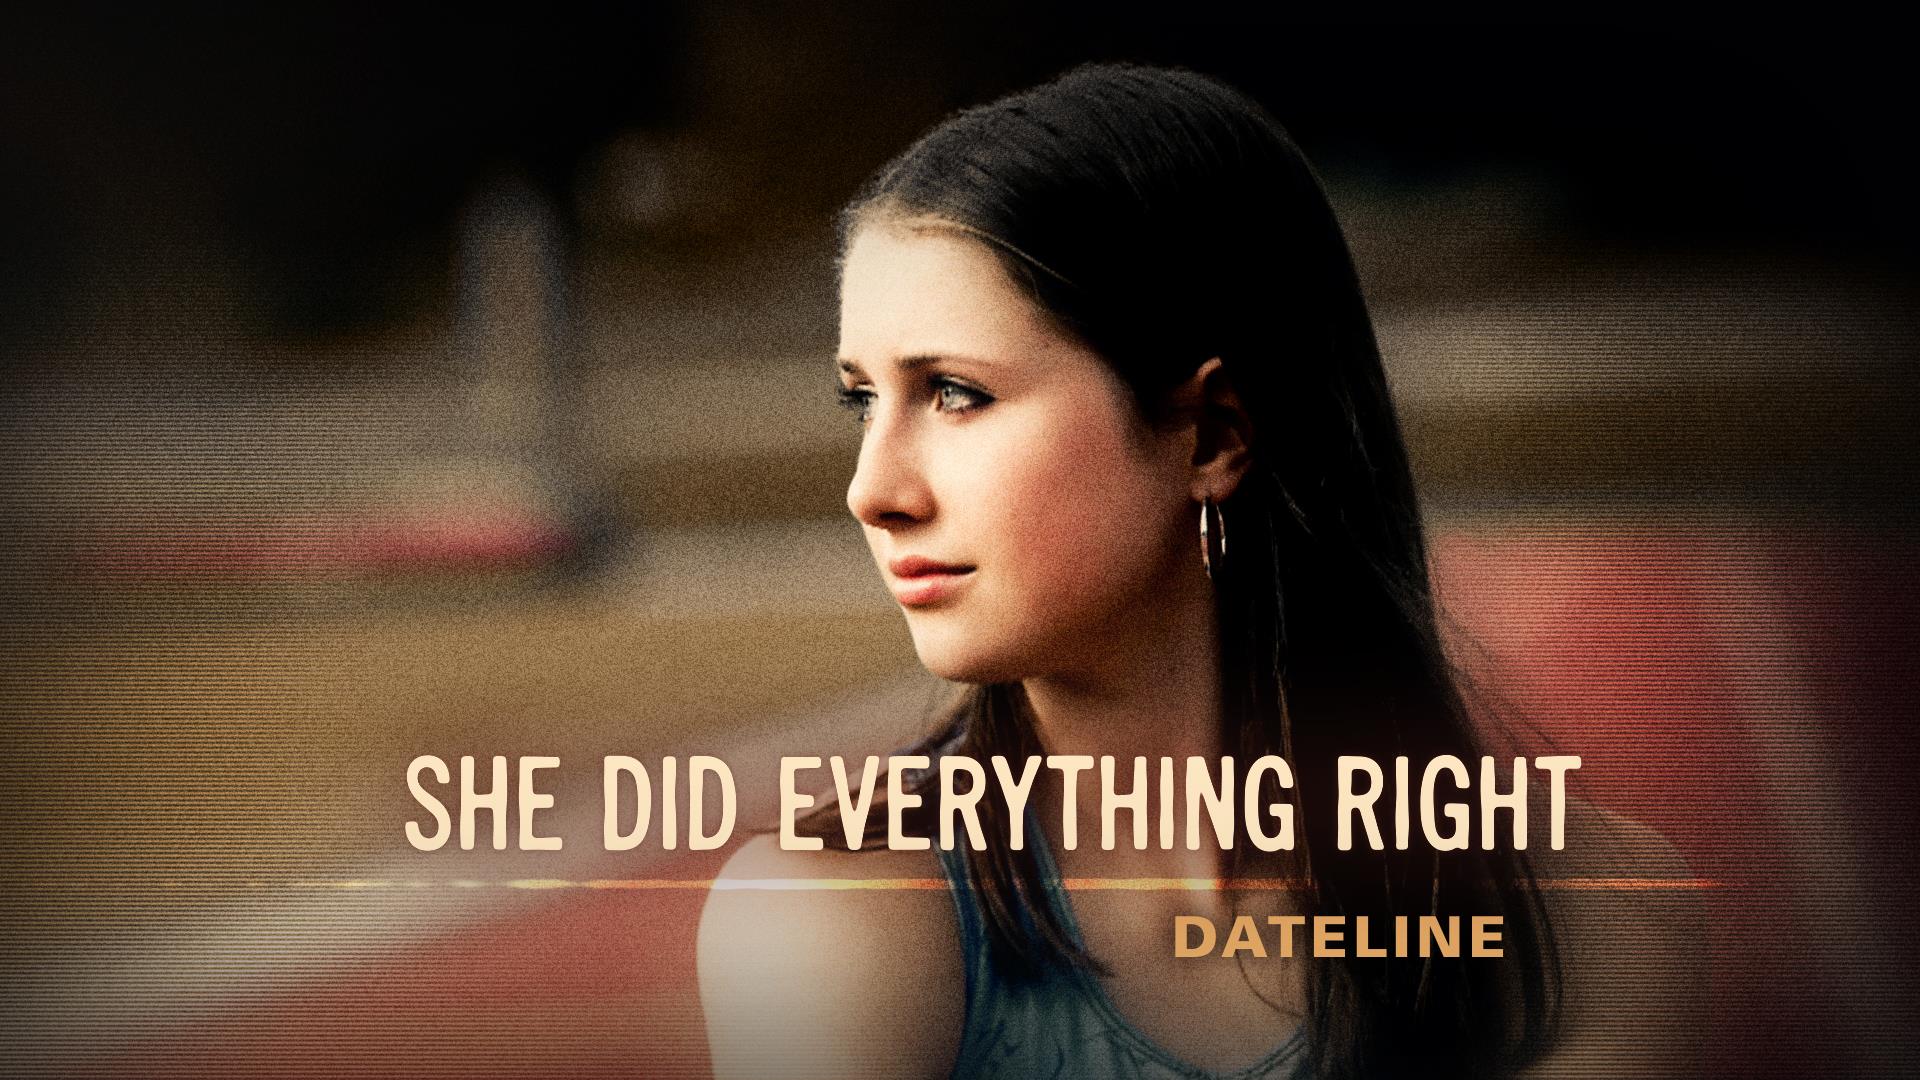 Dateline Episode Trailer: She Did Everything Right.